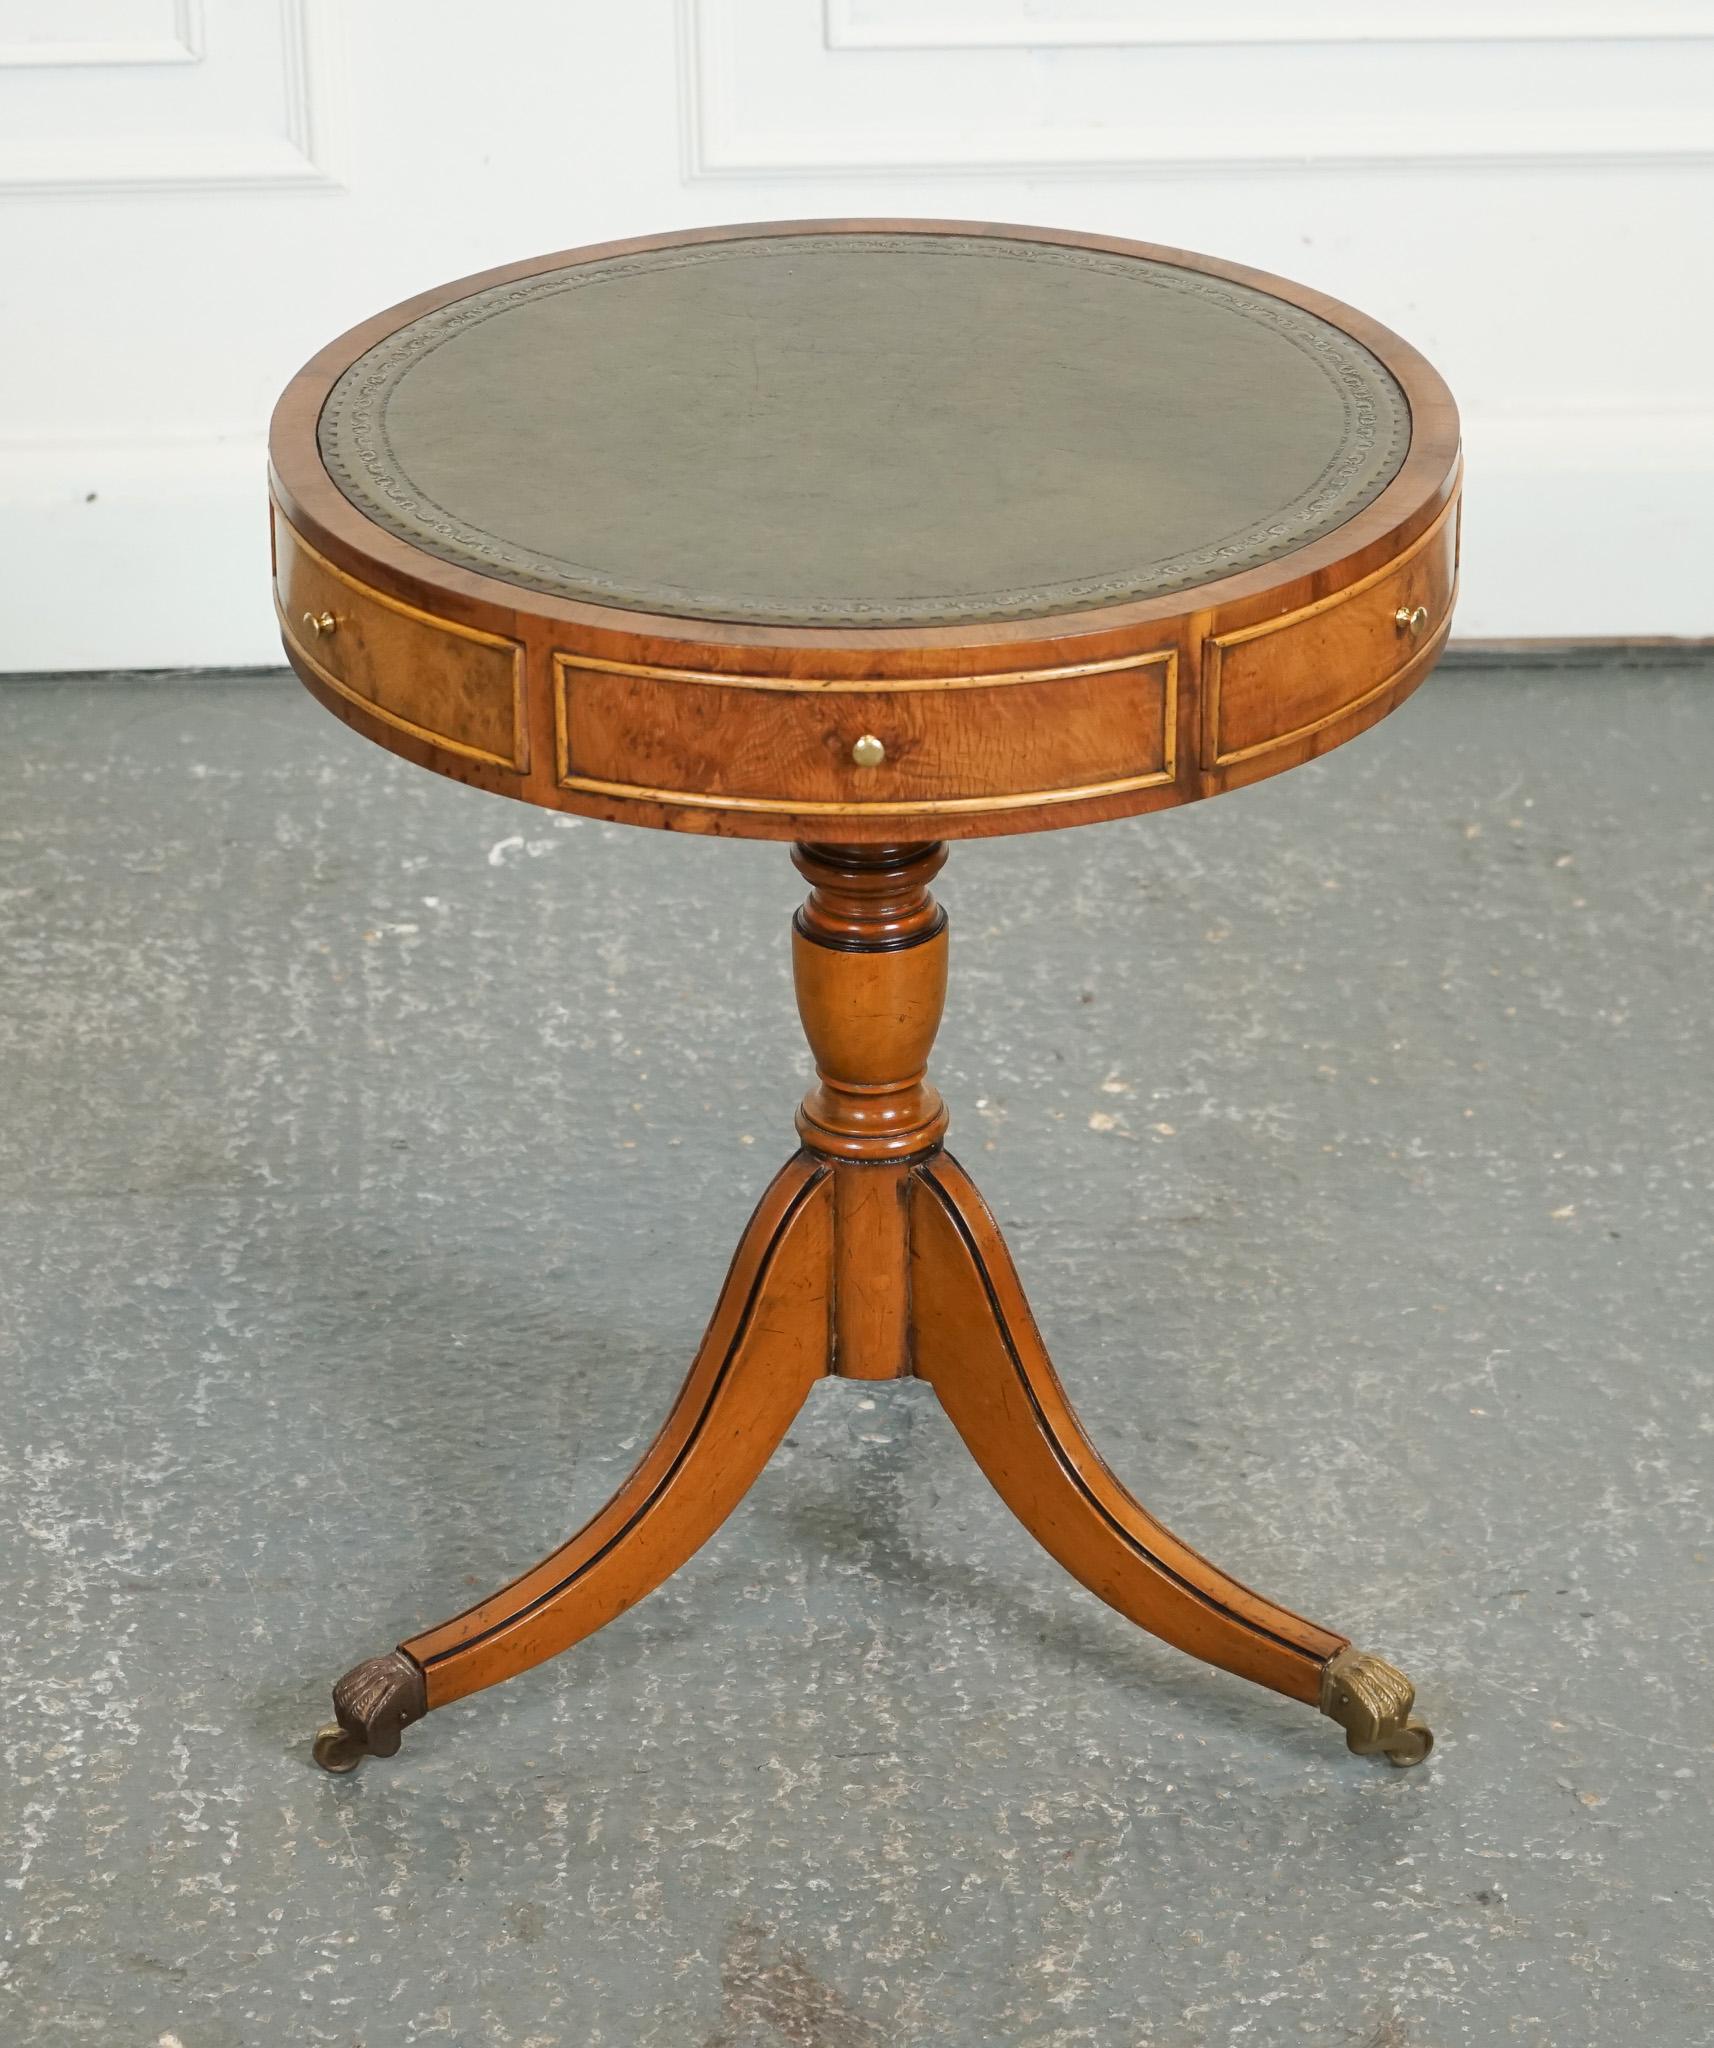 

We are delighted to offer for sale this Vintage Yew Wood Drum Table With Green Leather Top.

The Vintage Yew Wood Drum Table with Green Leather Top is a stunning piece that exudes timeless elegance and sophistication. Crafted with meticulous